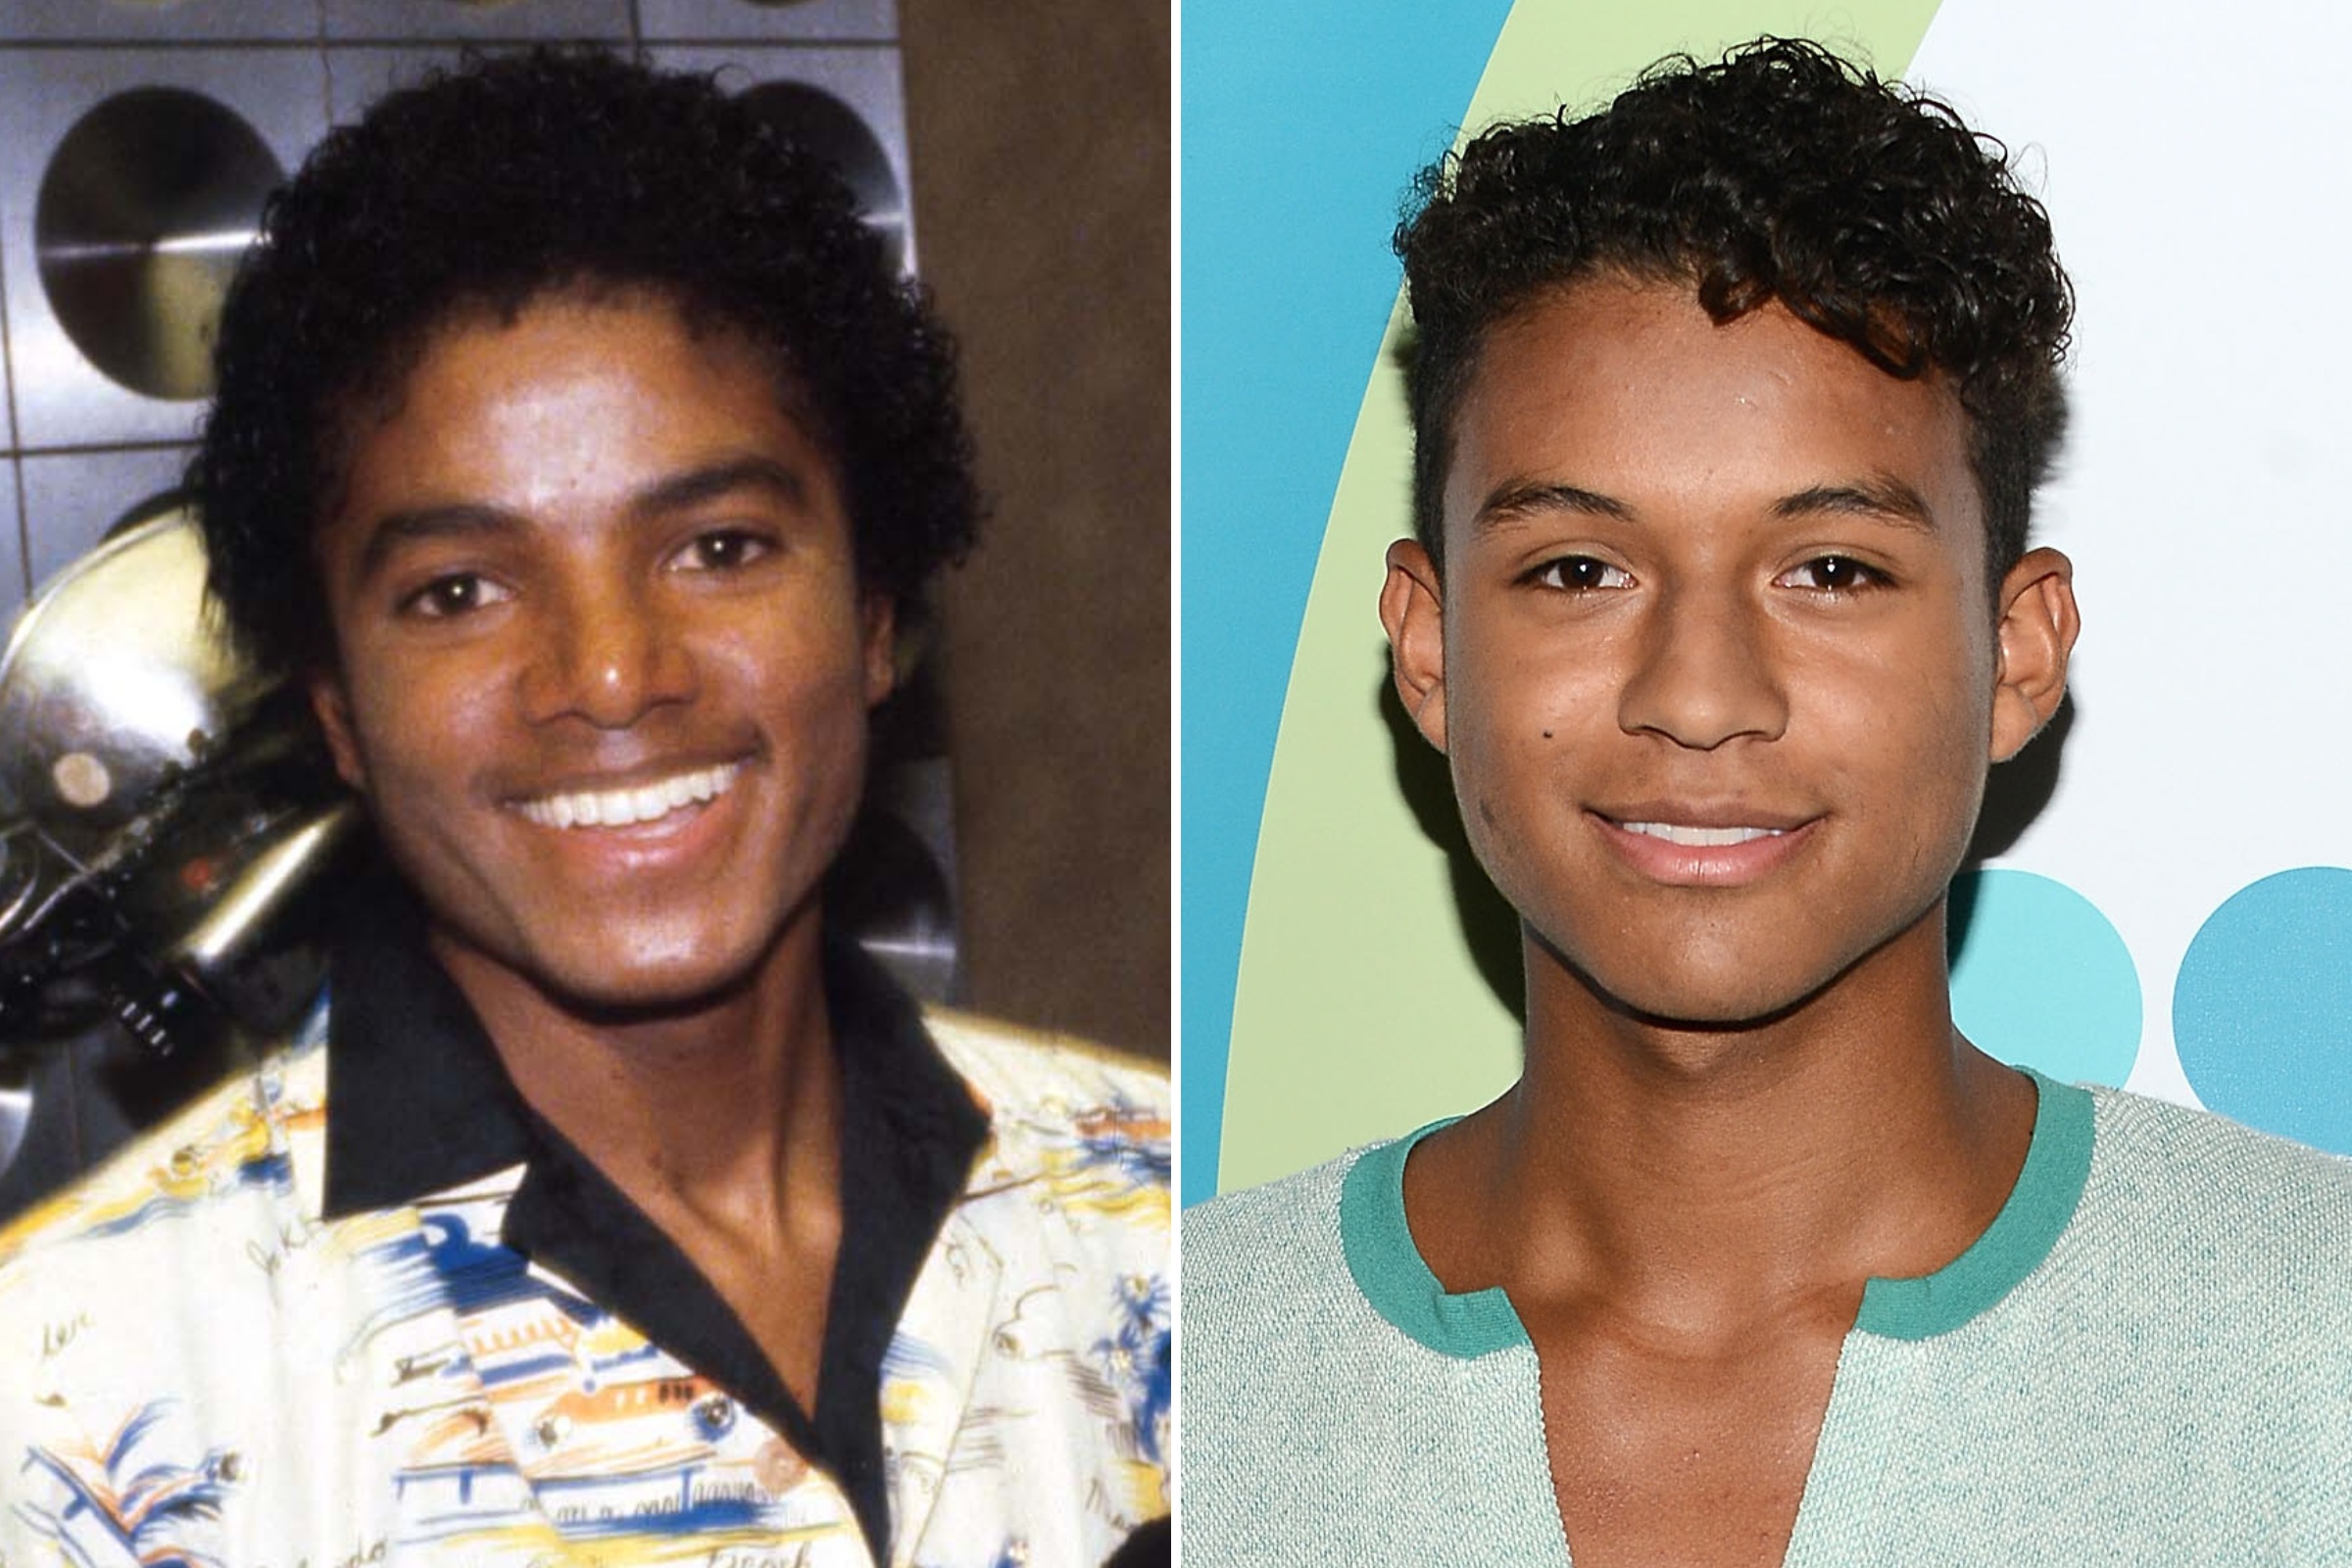 Michael Jackson's nephew to star in King of Pop biopic – The